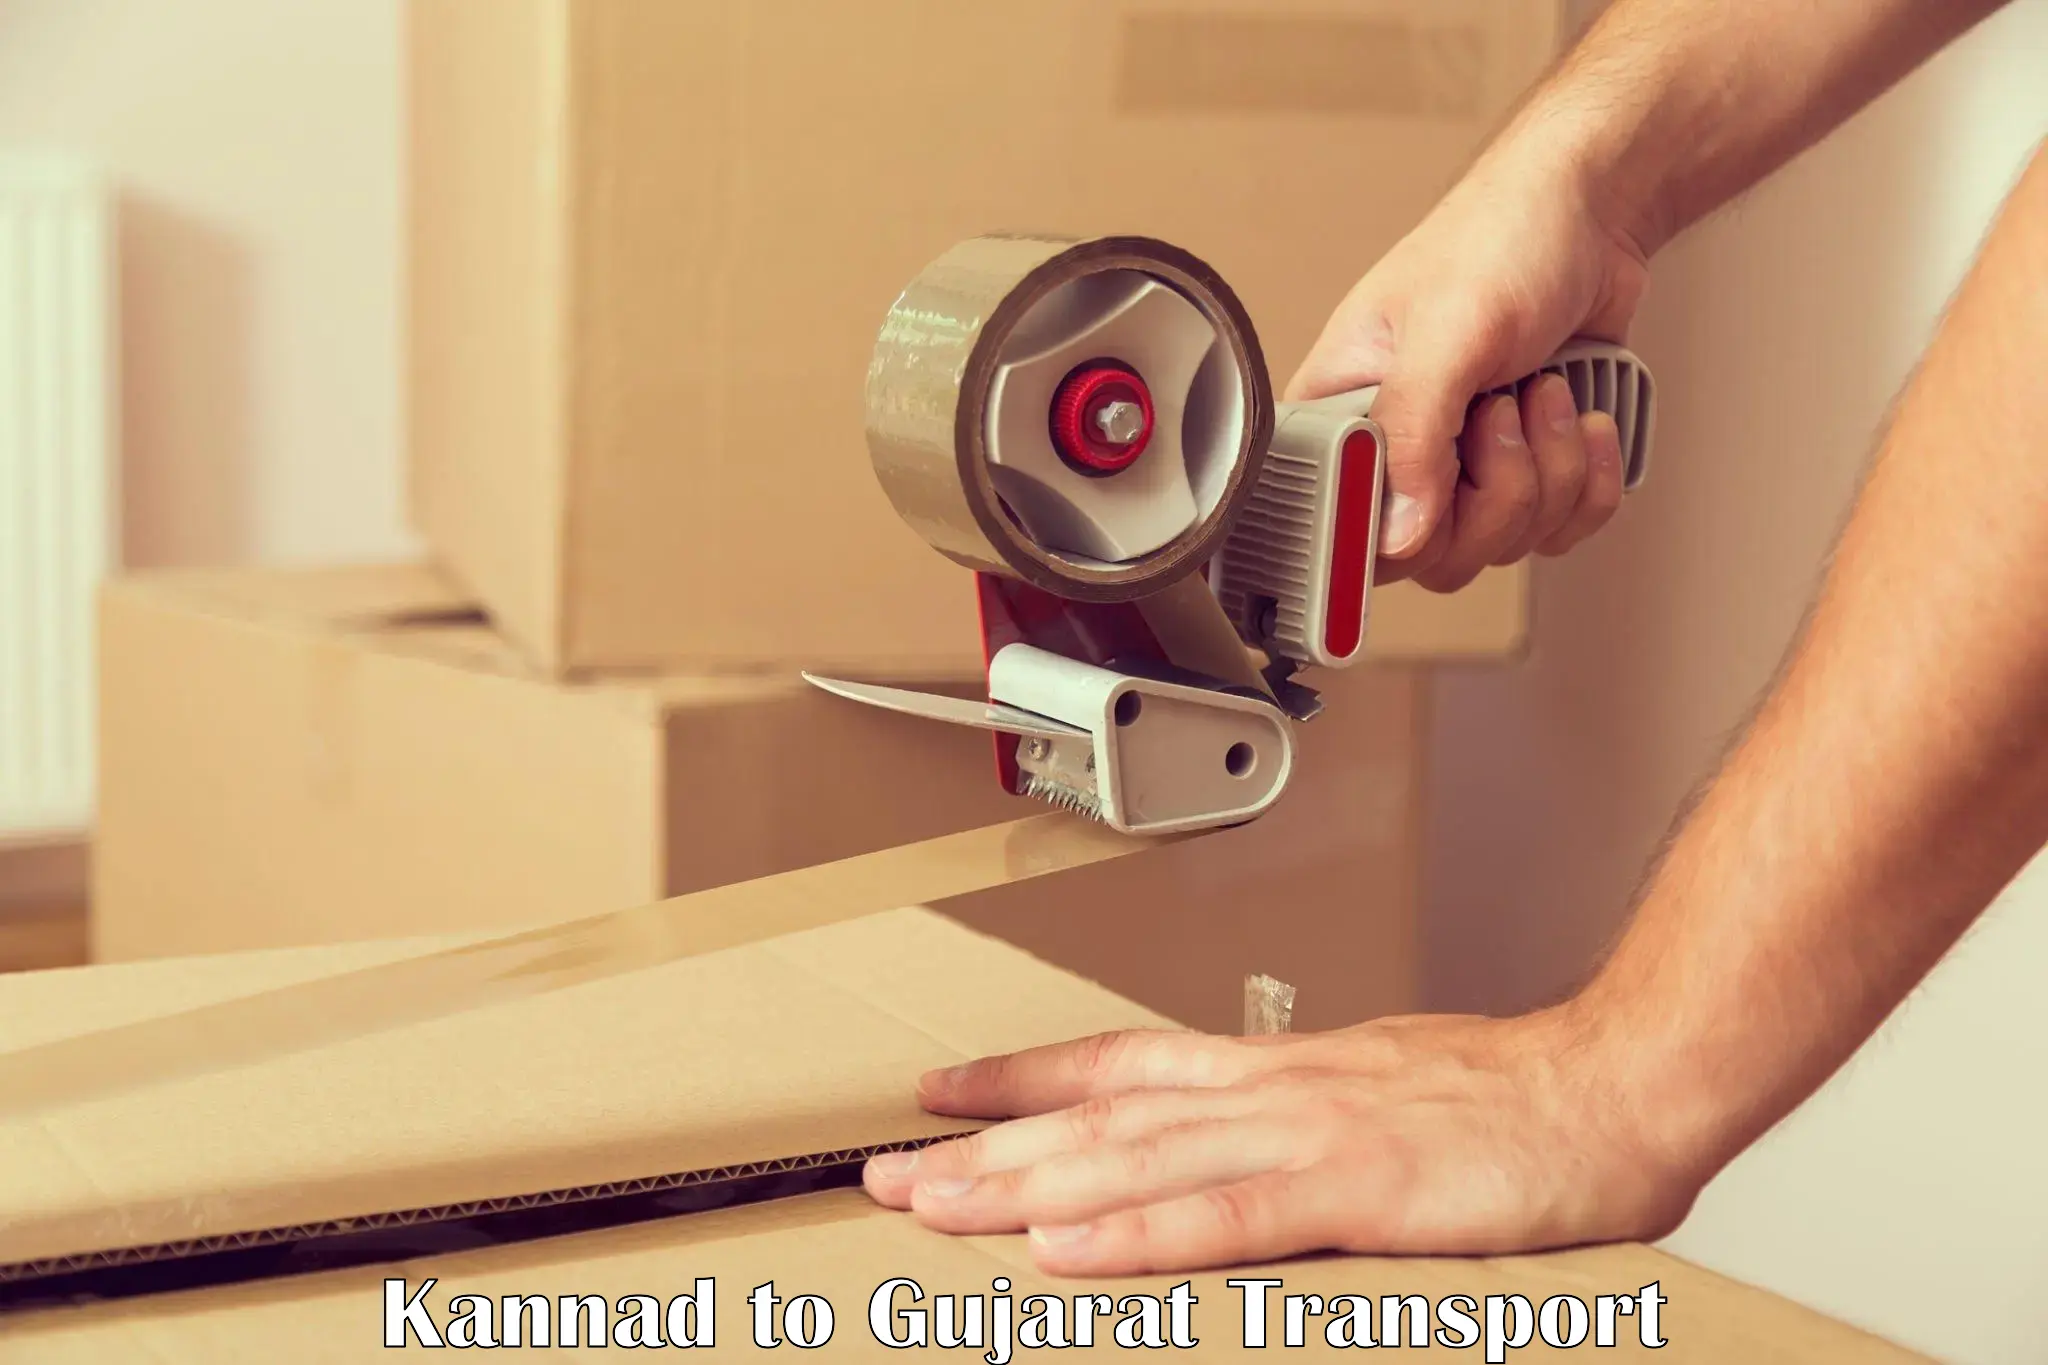 Nationwide transport services Kannad to Palanpur